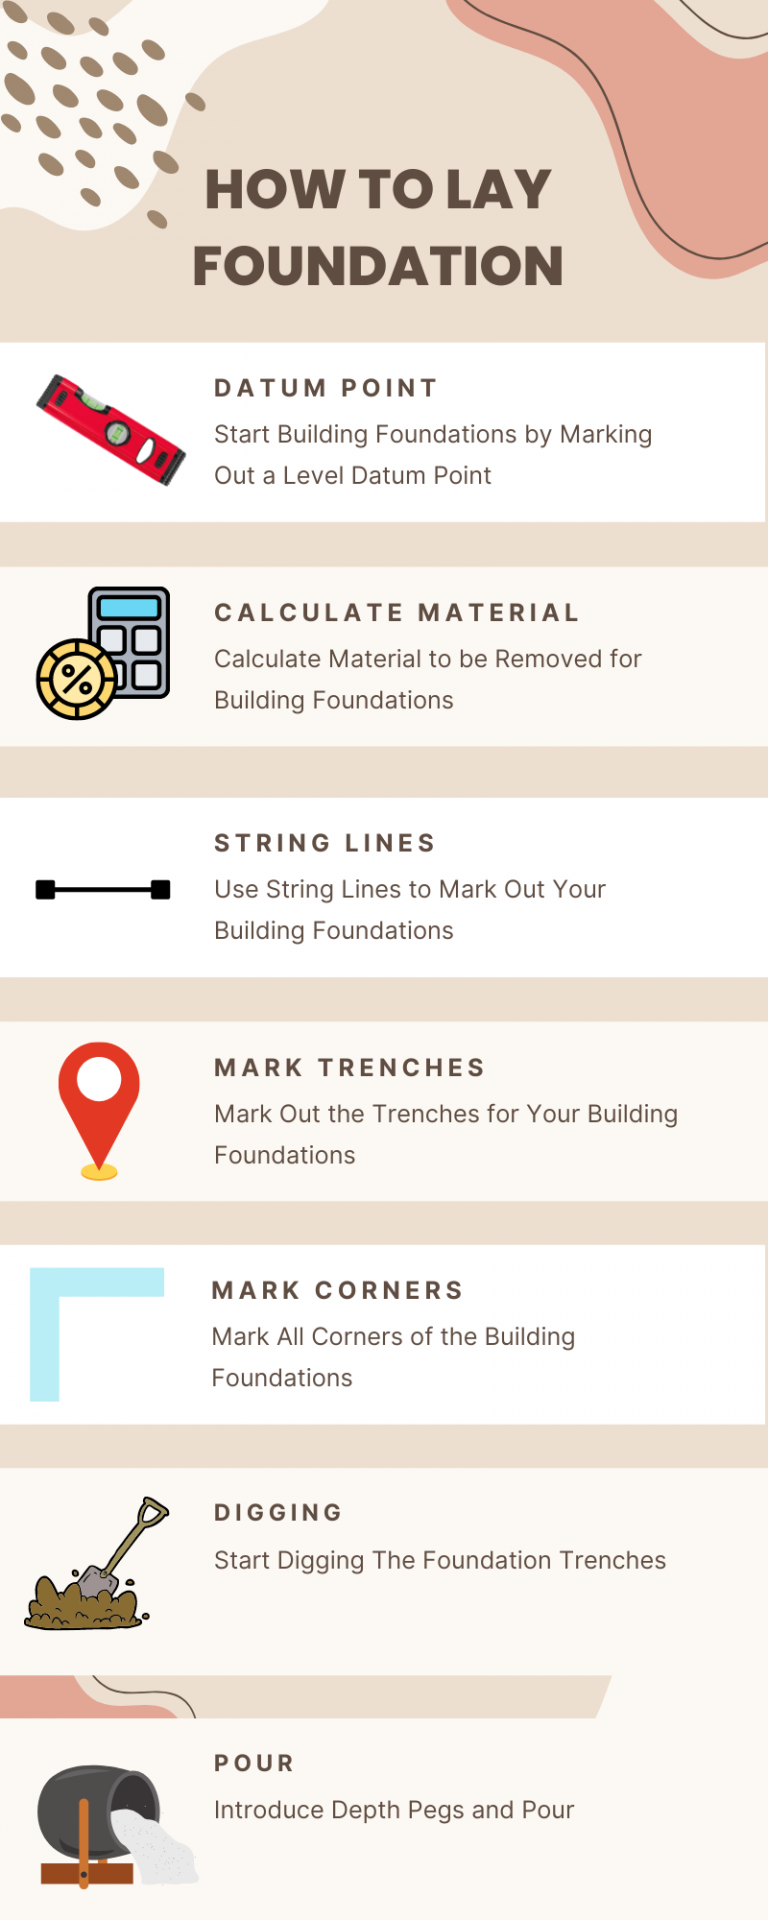 Tips To Laying A Concrete Foundation More Effectively